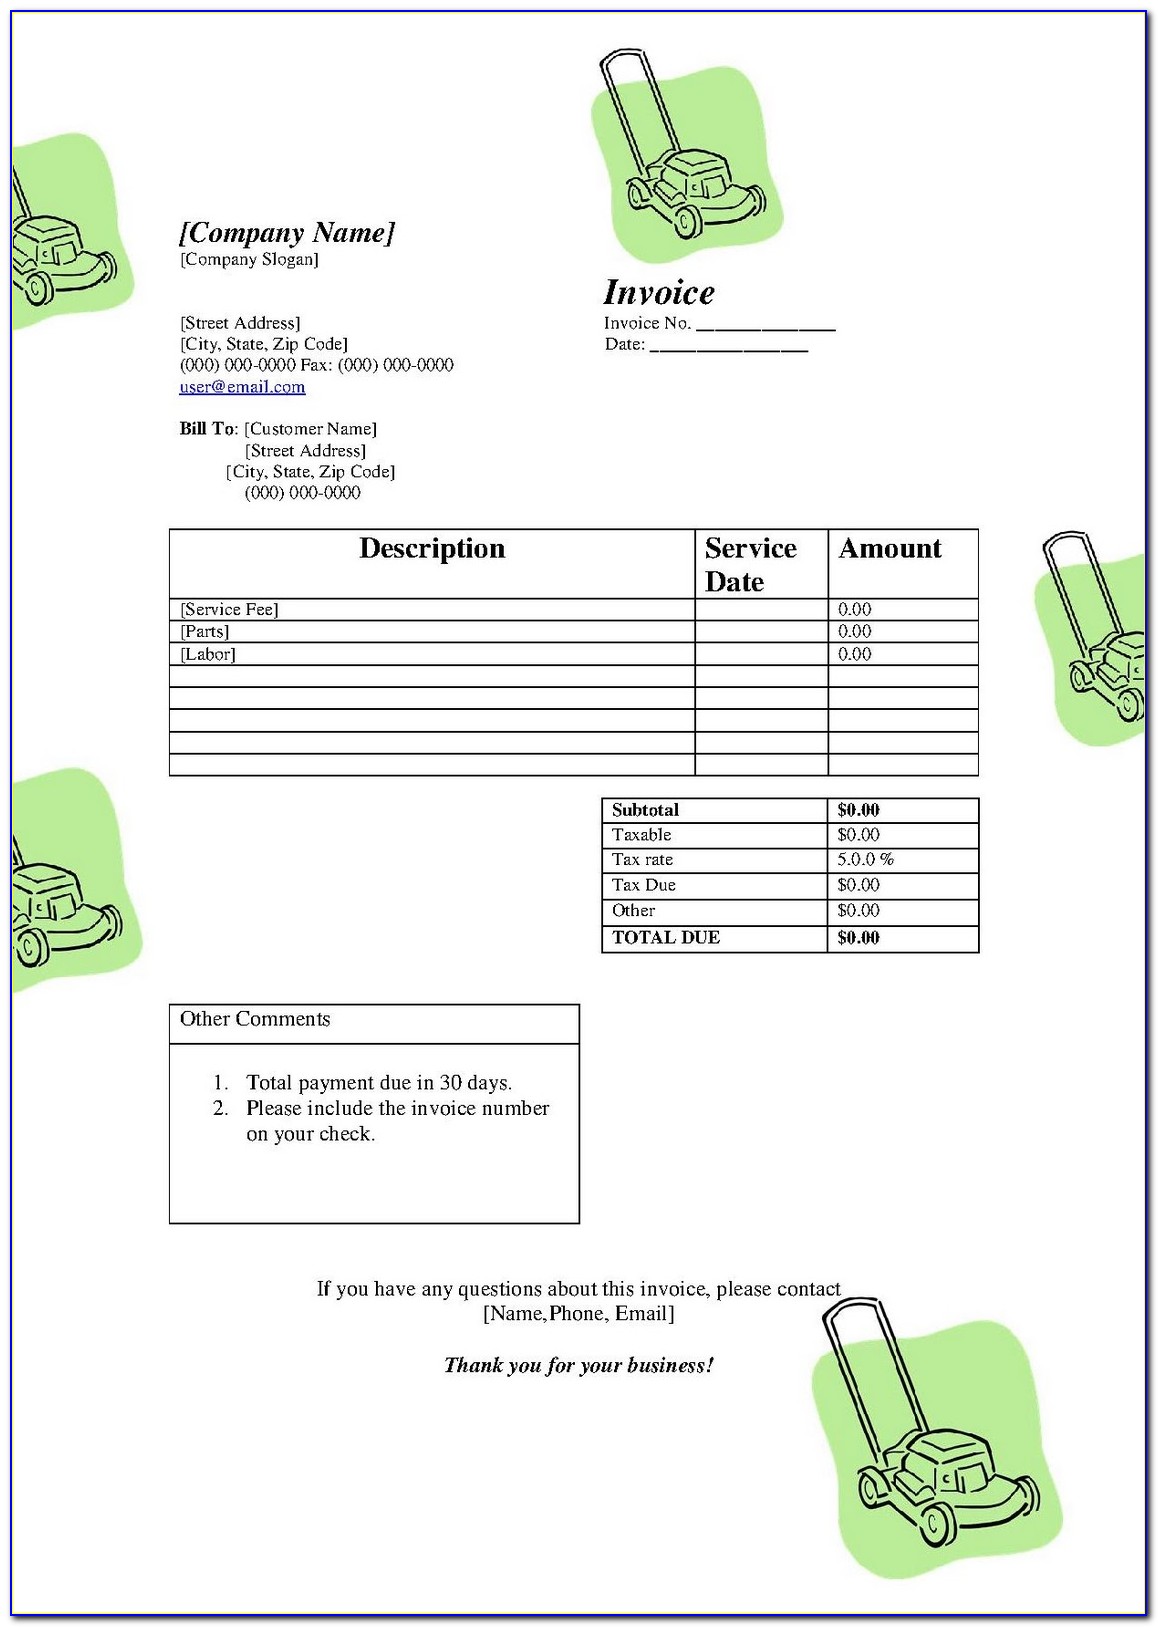 Invoice Template For Landscaping